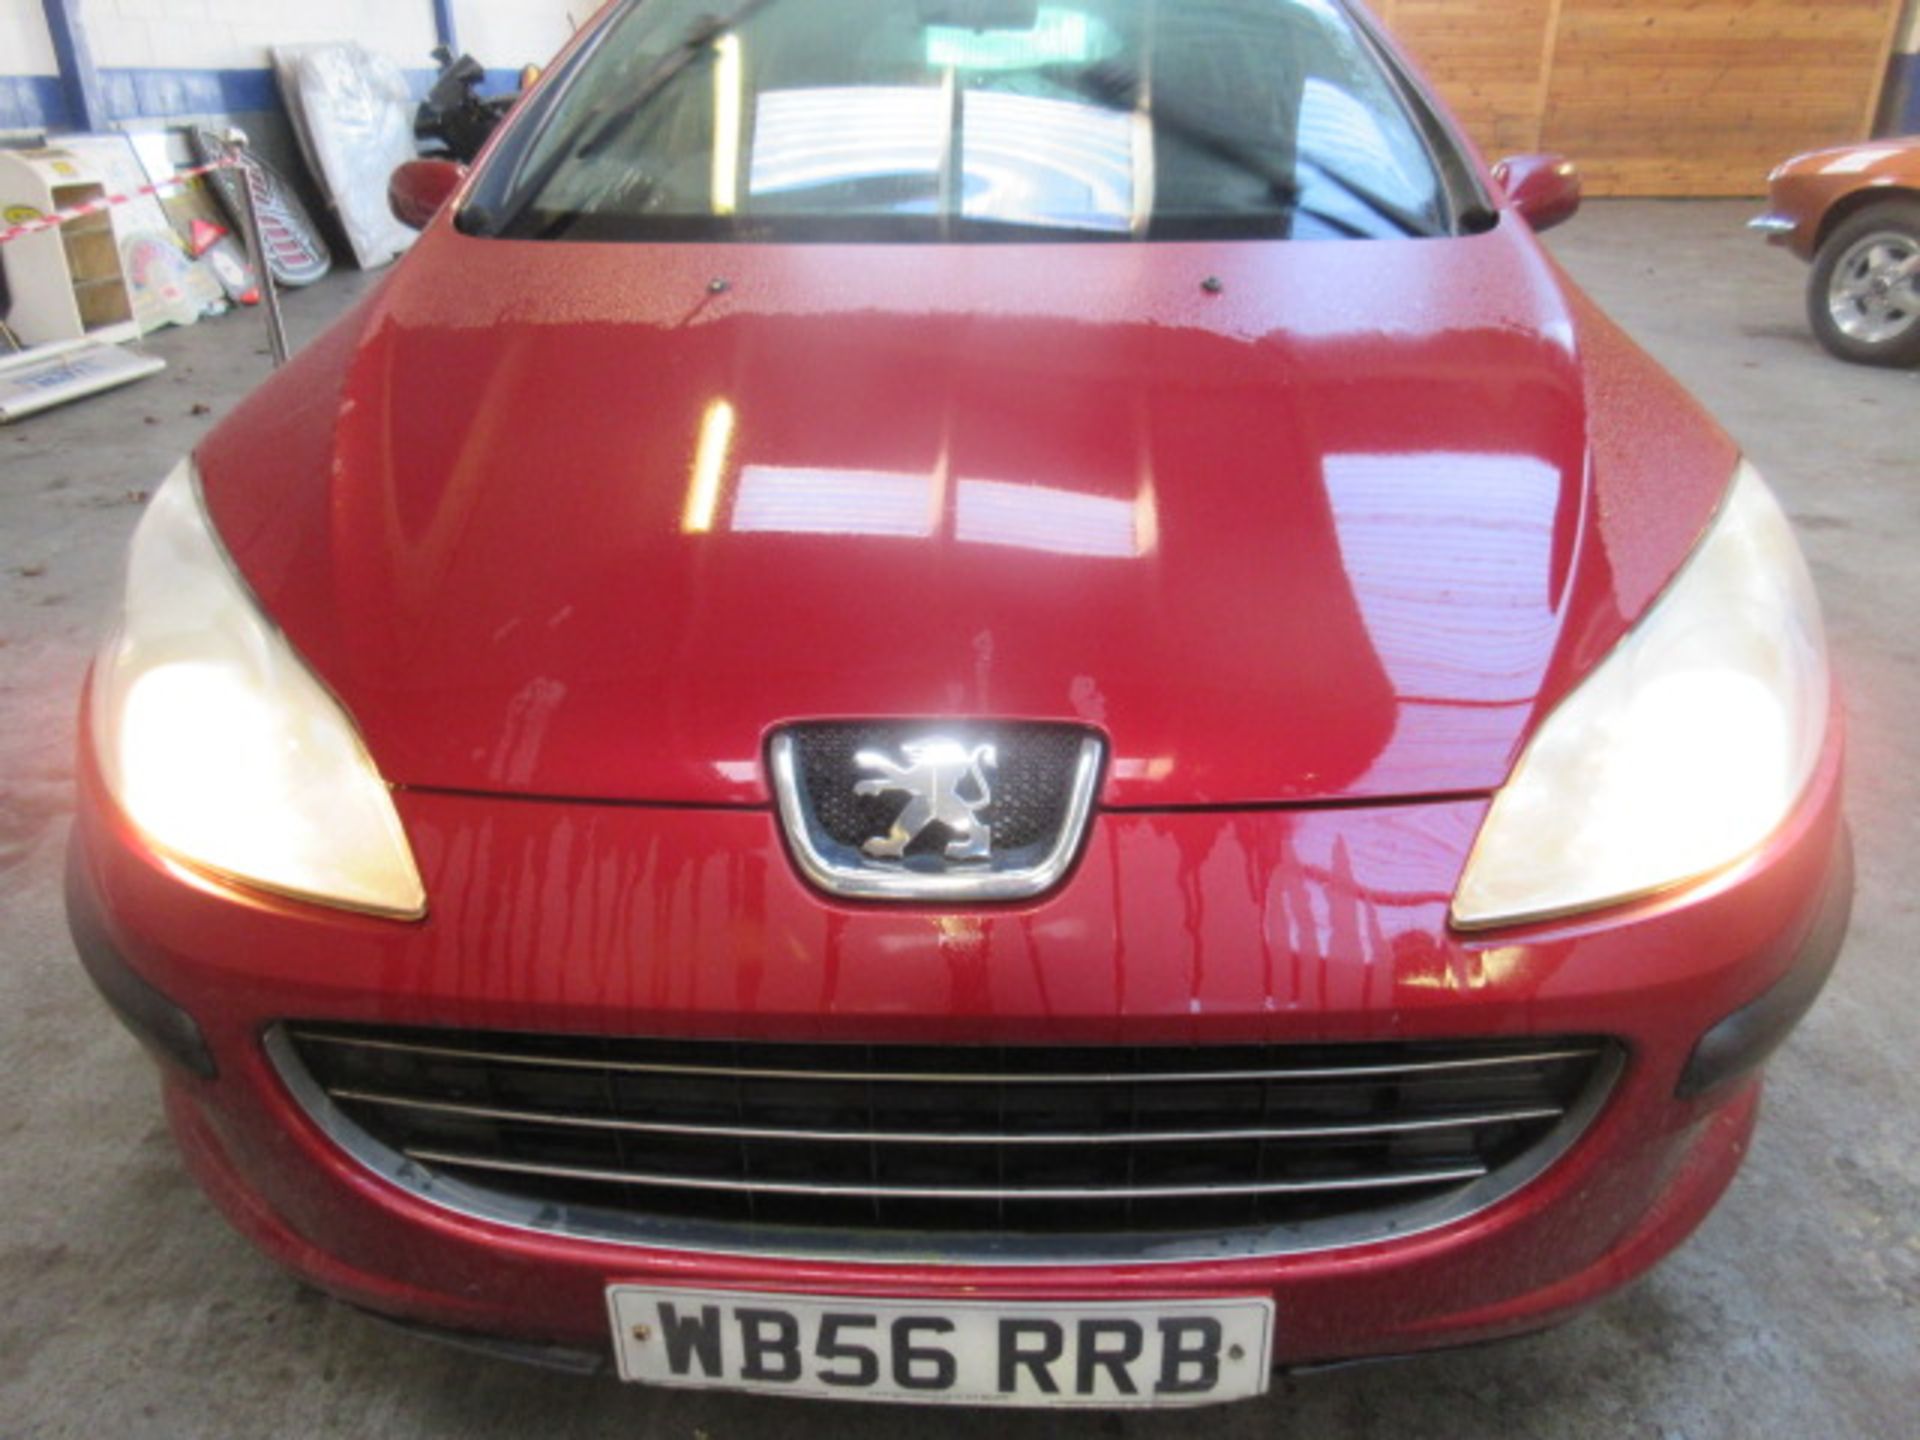 56 06 Peugeot 407 SW S HDI - Image 13 of 15